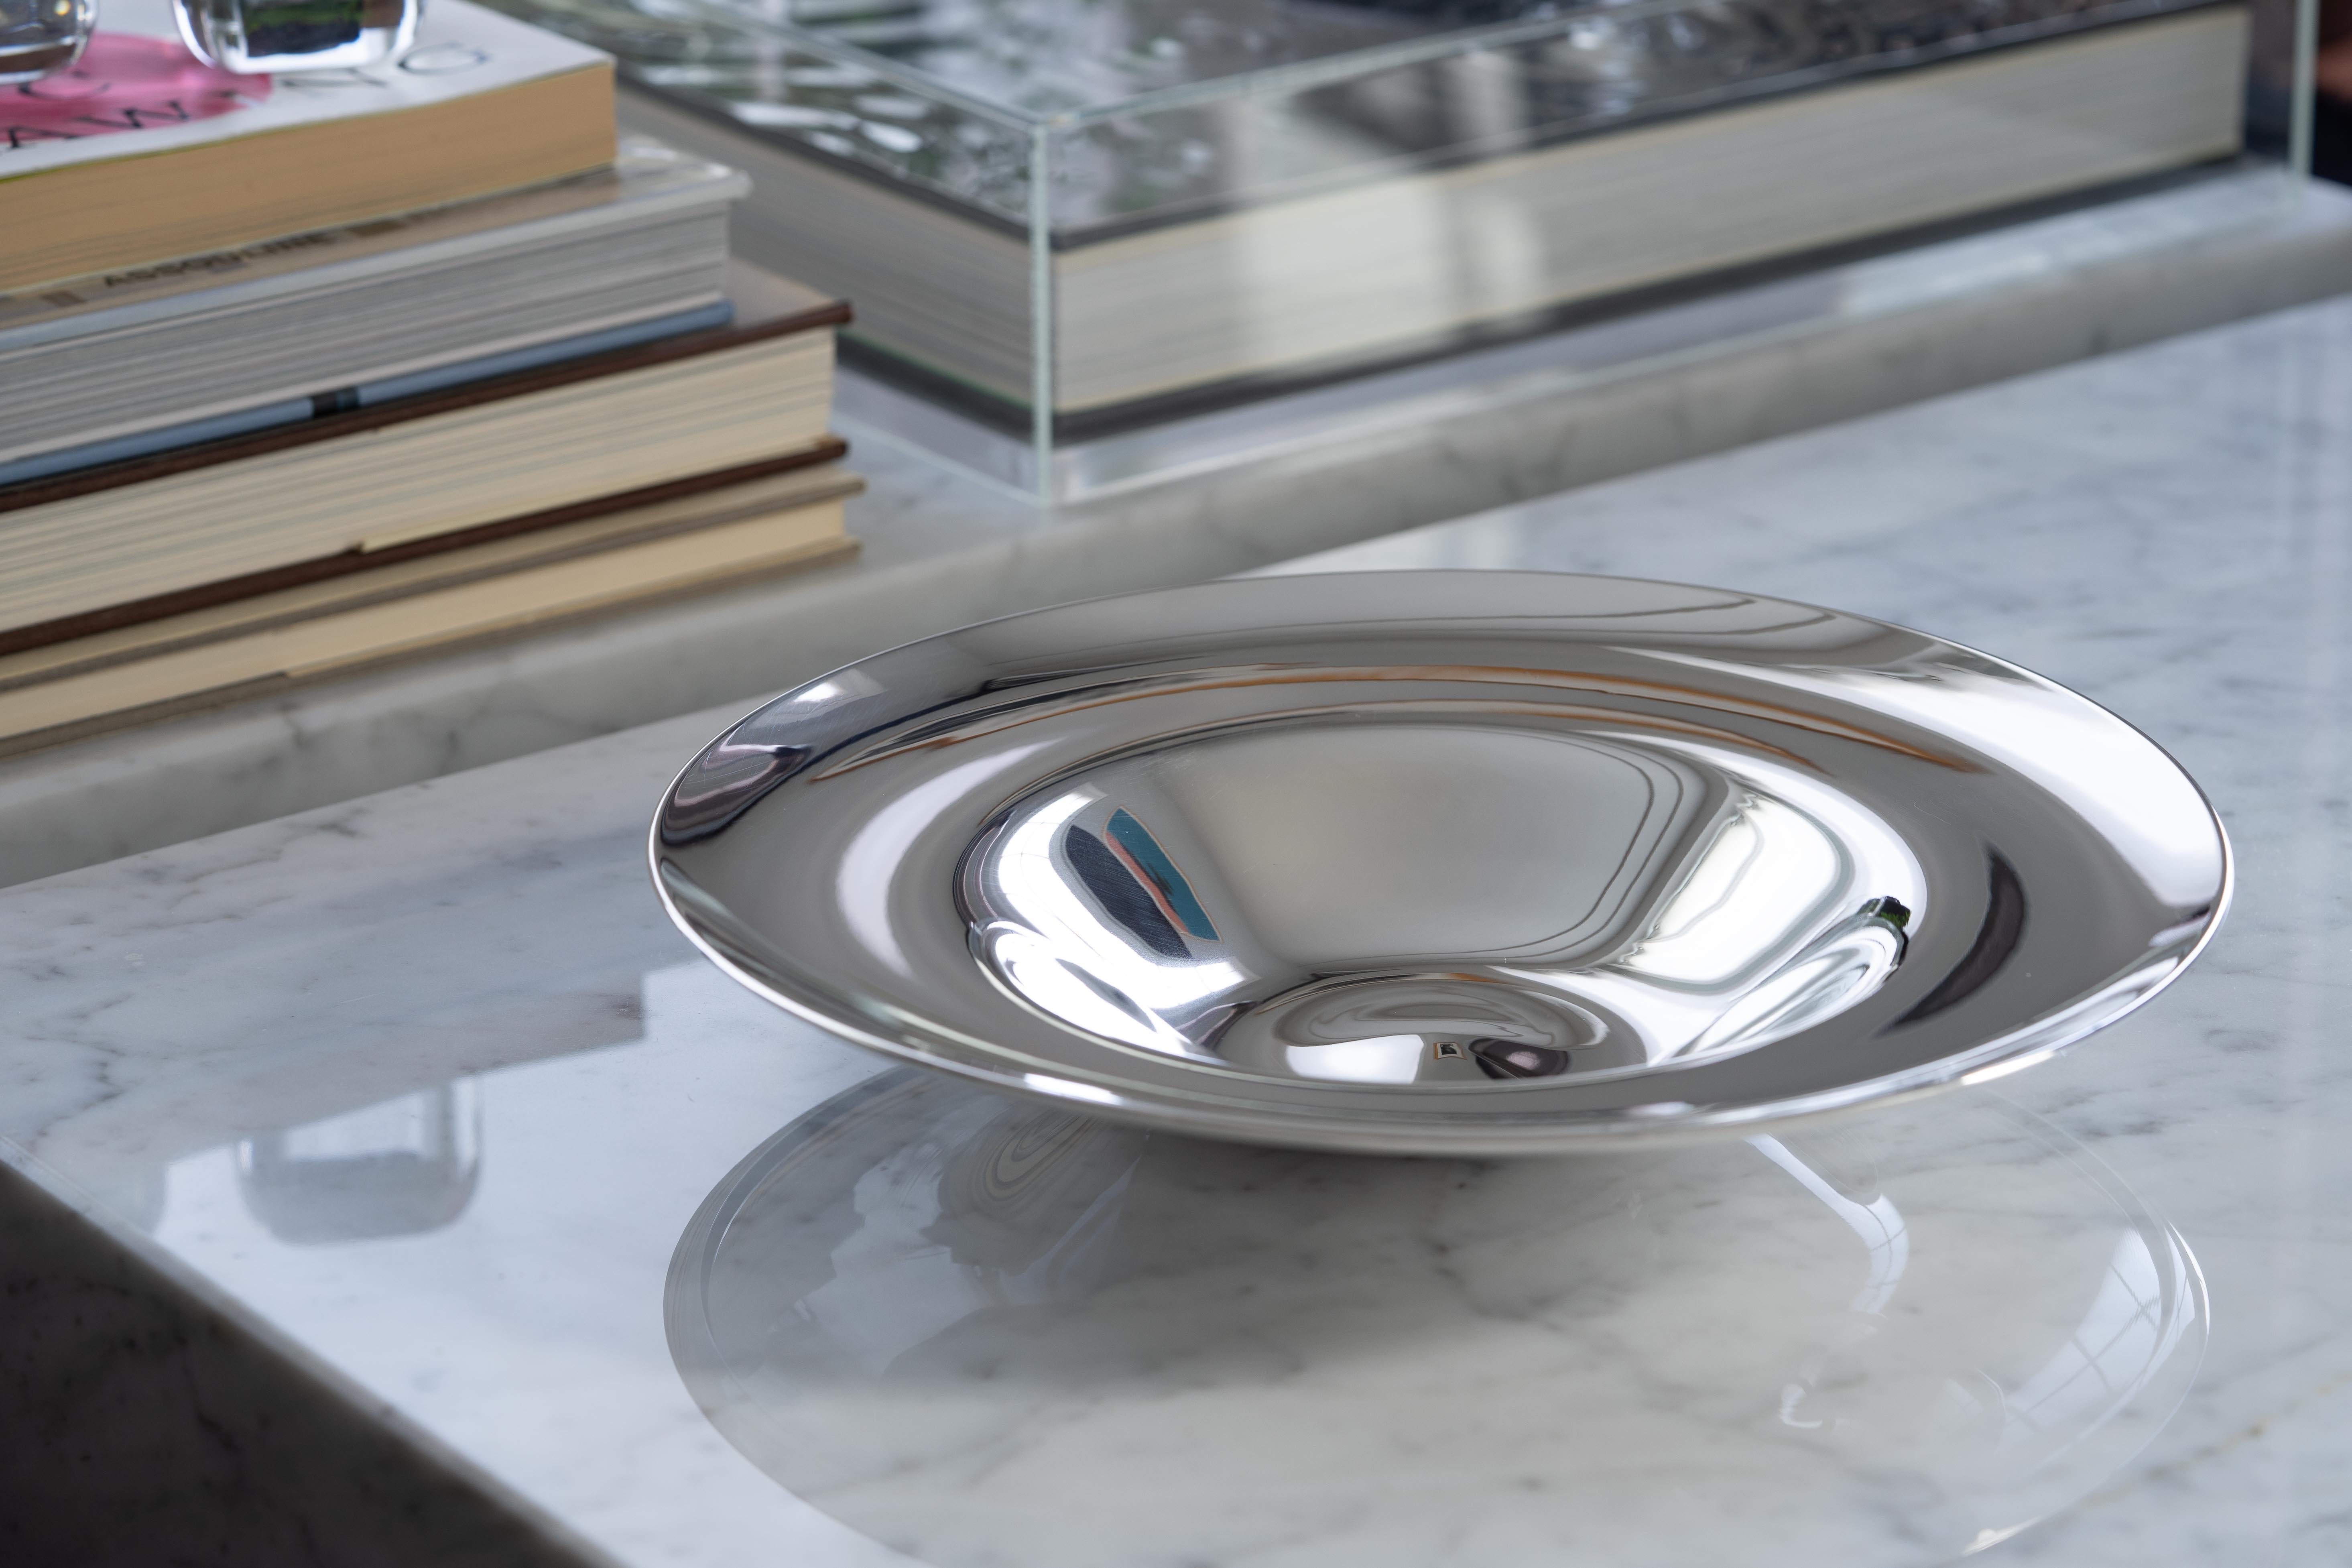 Solid silver bowl designed by Afra & Tobia Scarpa for Milan-based silversmiths San Lorenzo in 1992. Made from 999 pure silver, the bowl's seamless surface reflects and distorts its surroundings to beautiful effect, while highlighting the natural